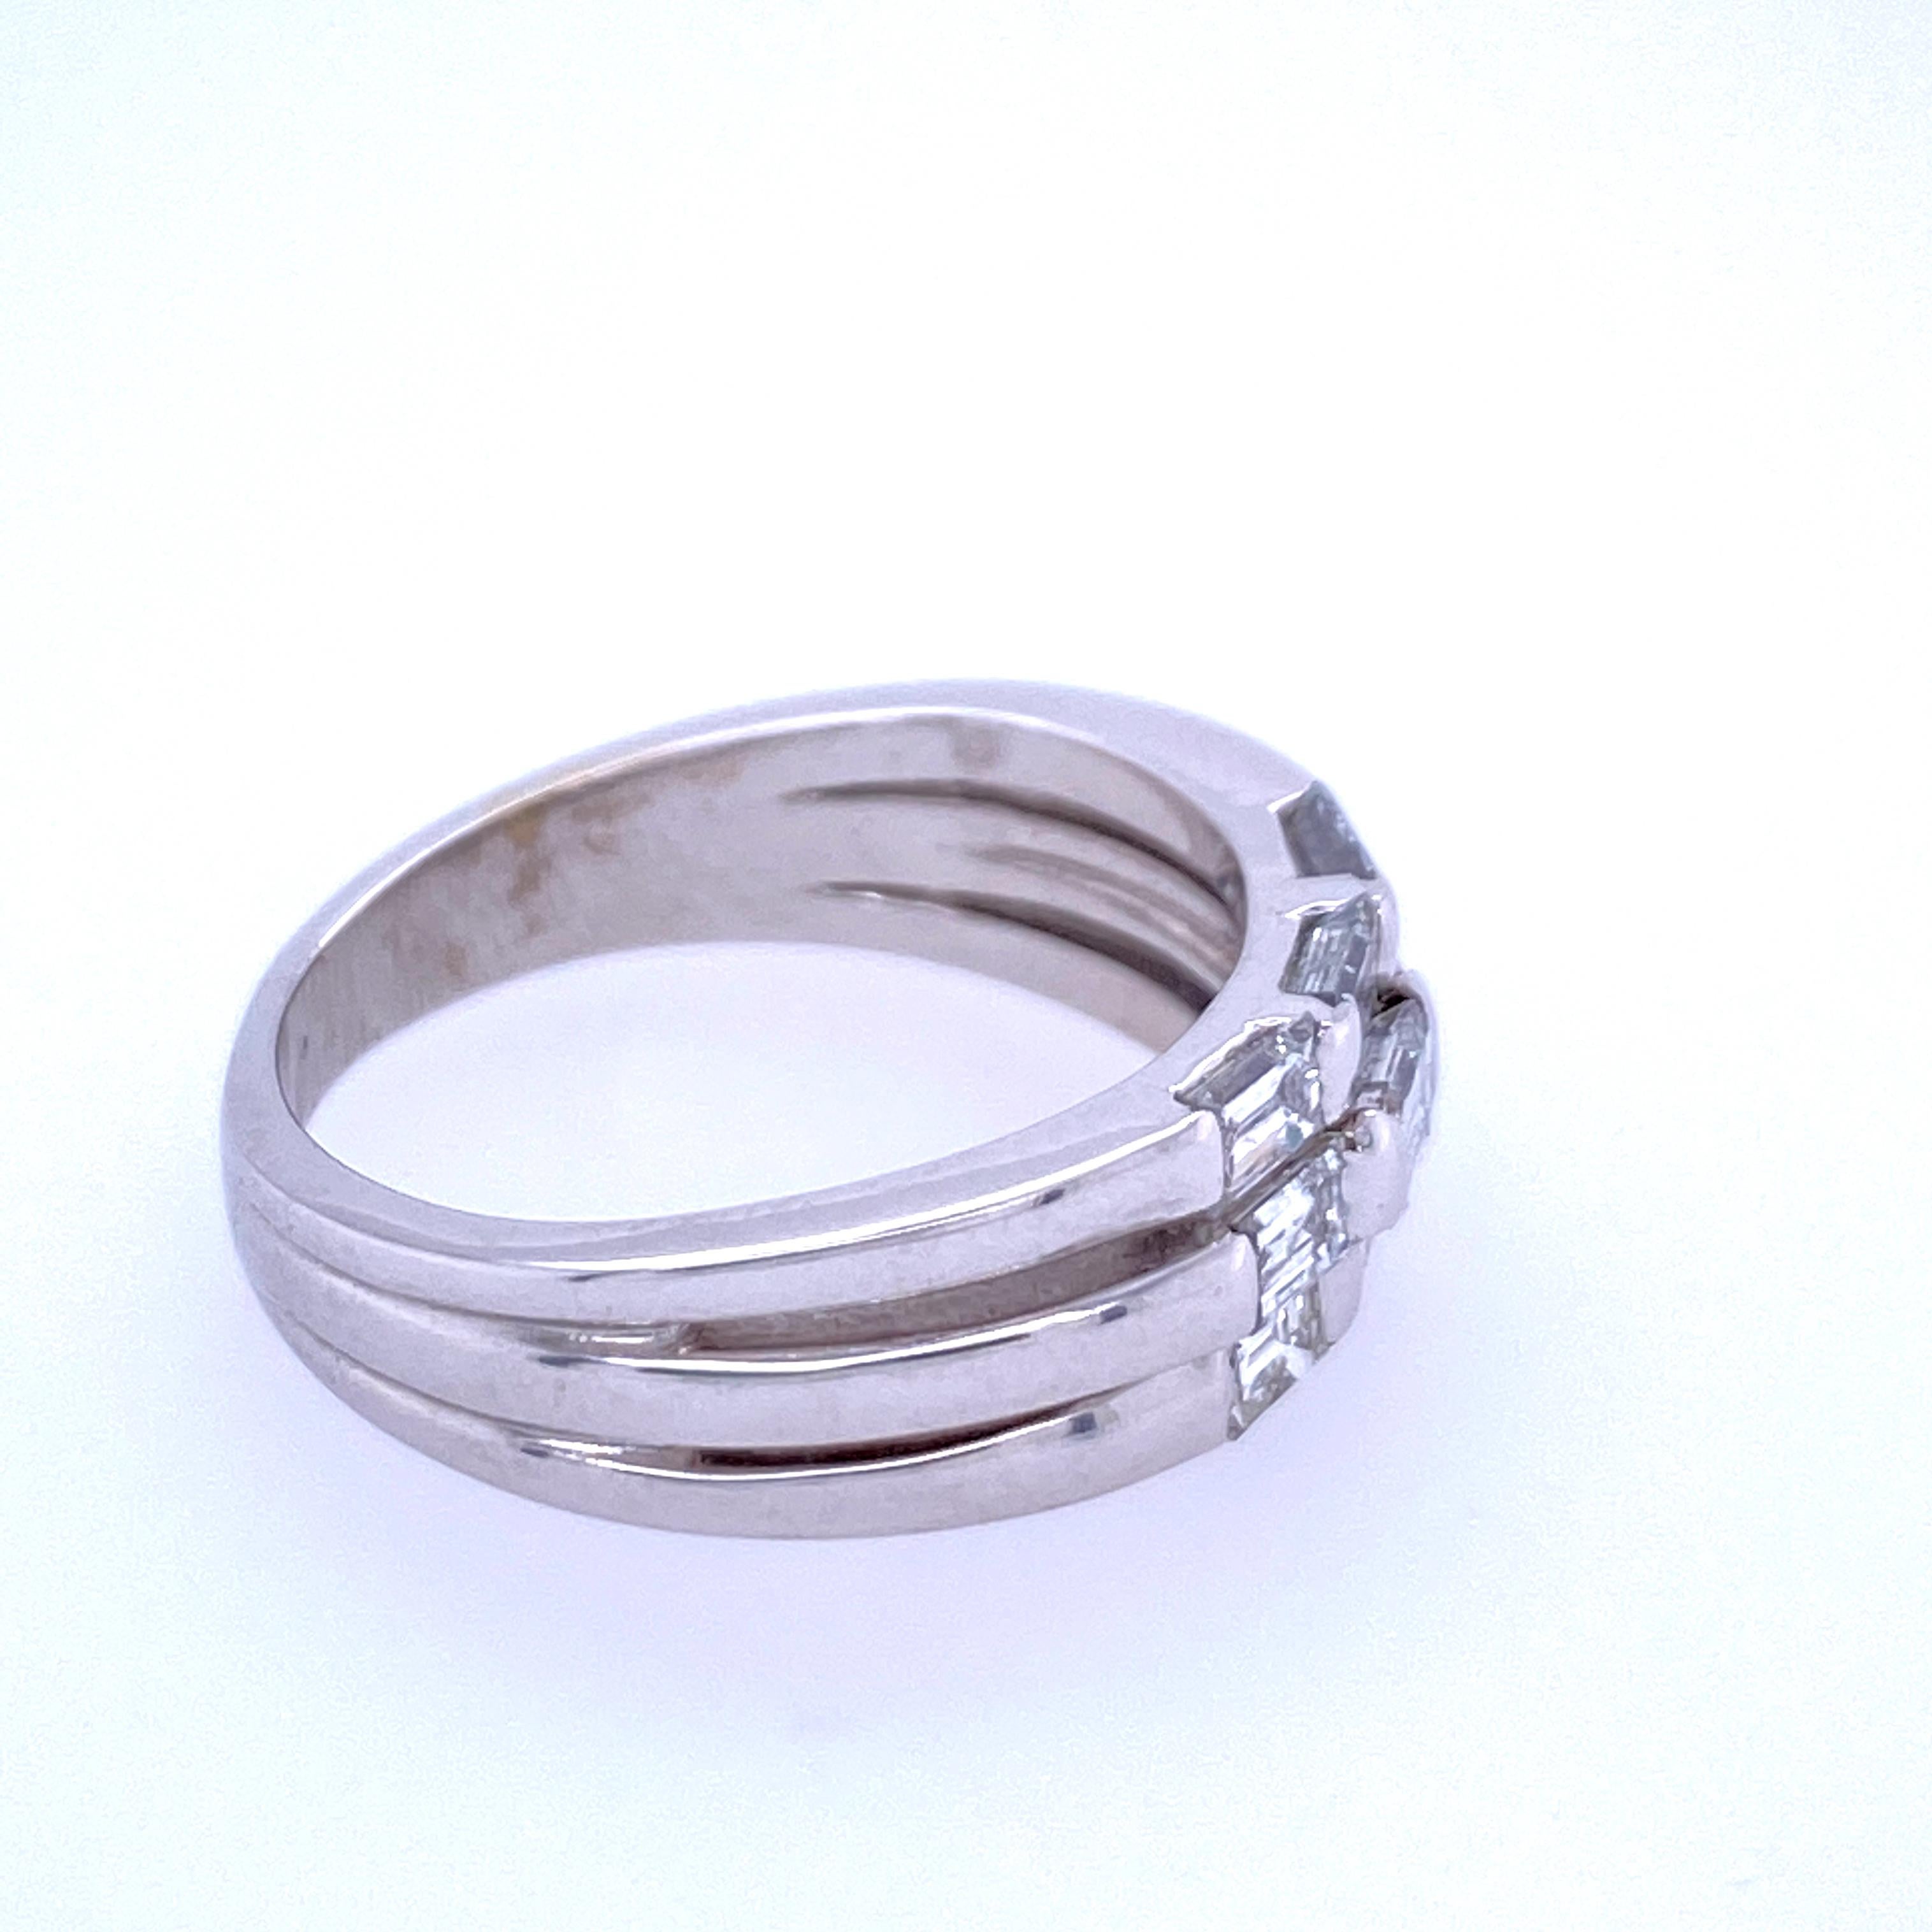 One 14 karat white gold (stamped 14K) three row ring, each row bar set with three straight baguette diamonds, approximately 1.20 carats total weight with matching H/I/J color and VS2-I1 clarity. The ring measures 6.95mm at the top and tapers to